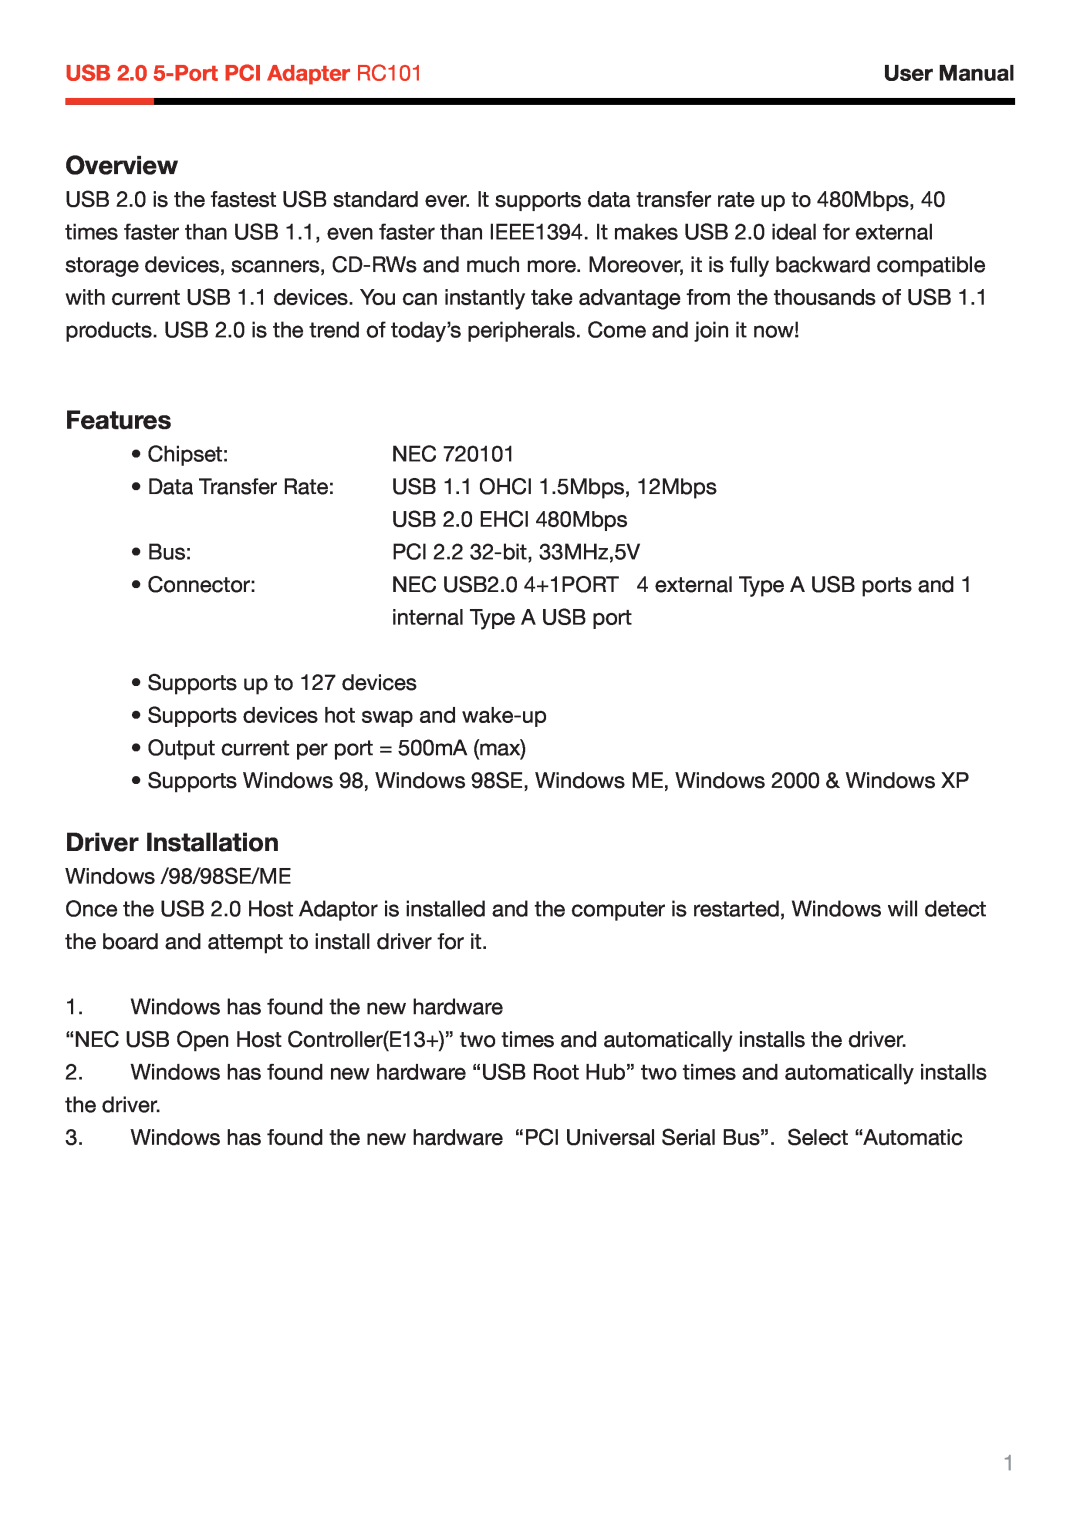 Rosewill RC-101 user manual Overview, Features, Driver Installation, USB 2.0 5-Port PCI Adapter RC101, User Manual 